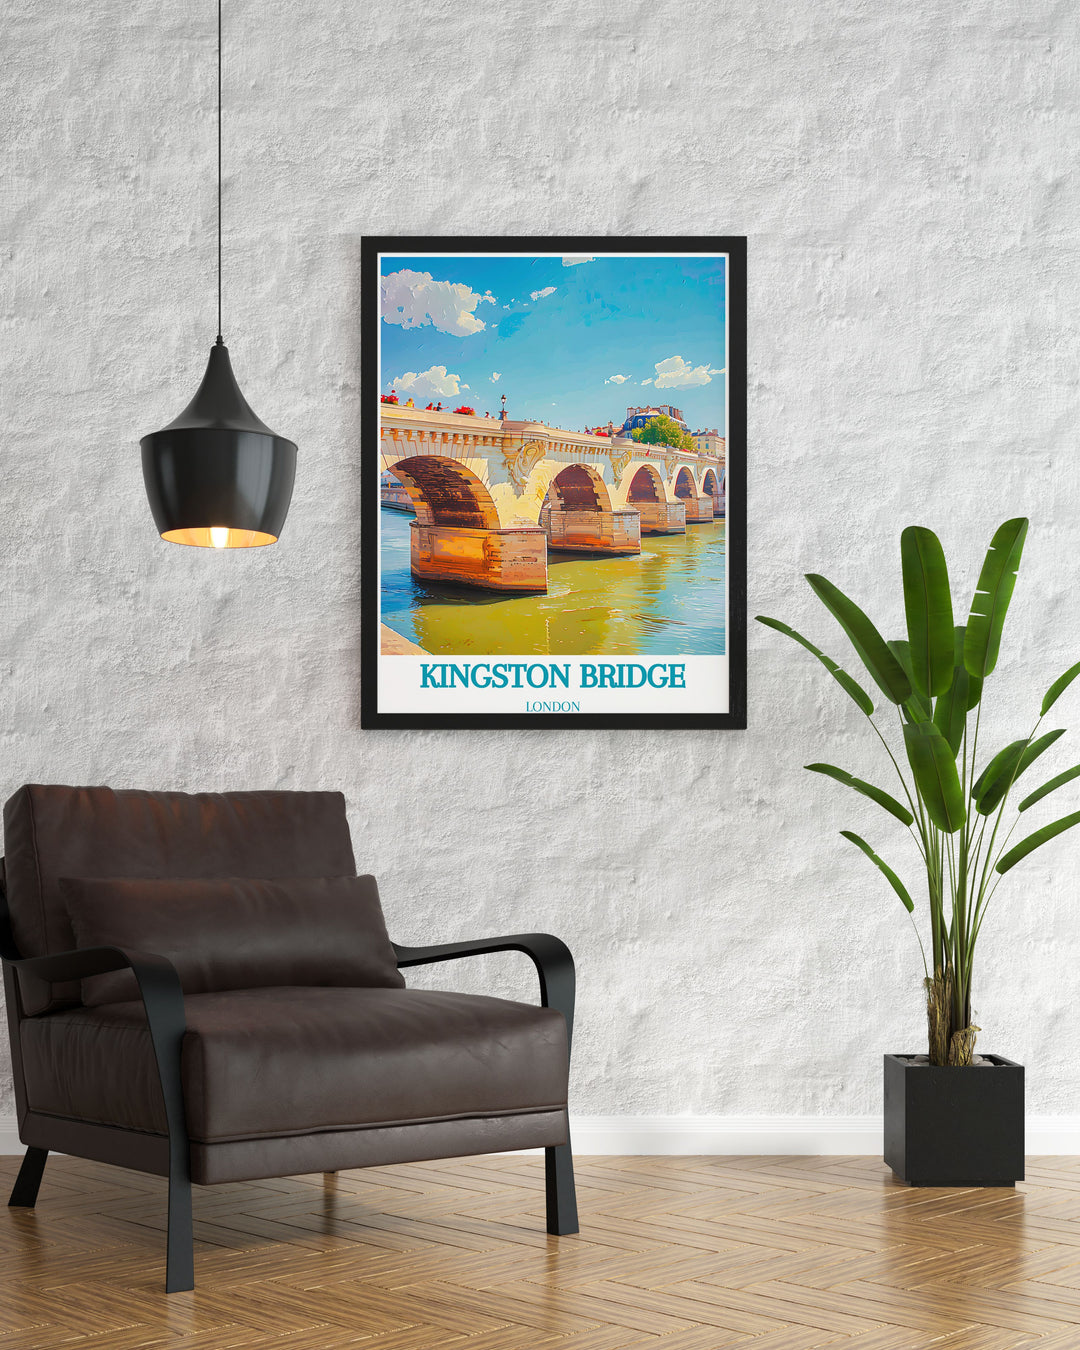 The travel poster of Kingston Bridge illustrates its role in the history of Kingston Upon Thames, bringing its architectural beauty and scenic views into your home.